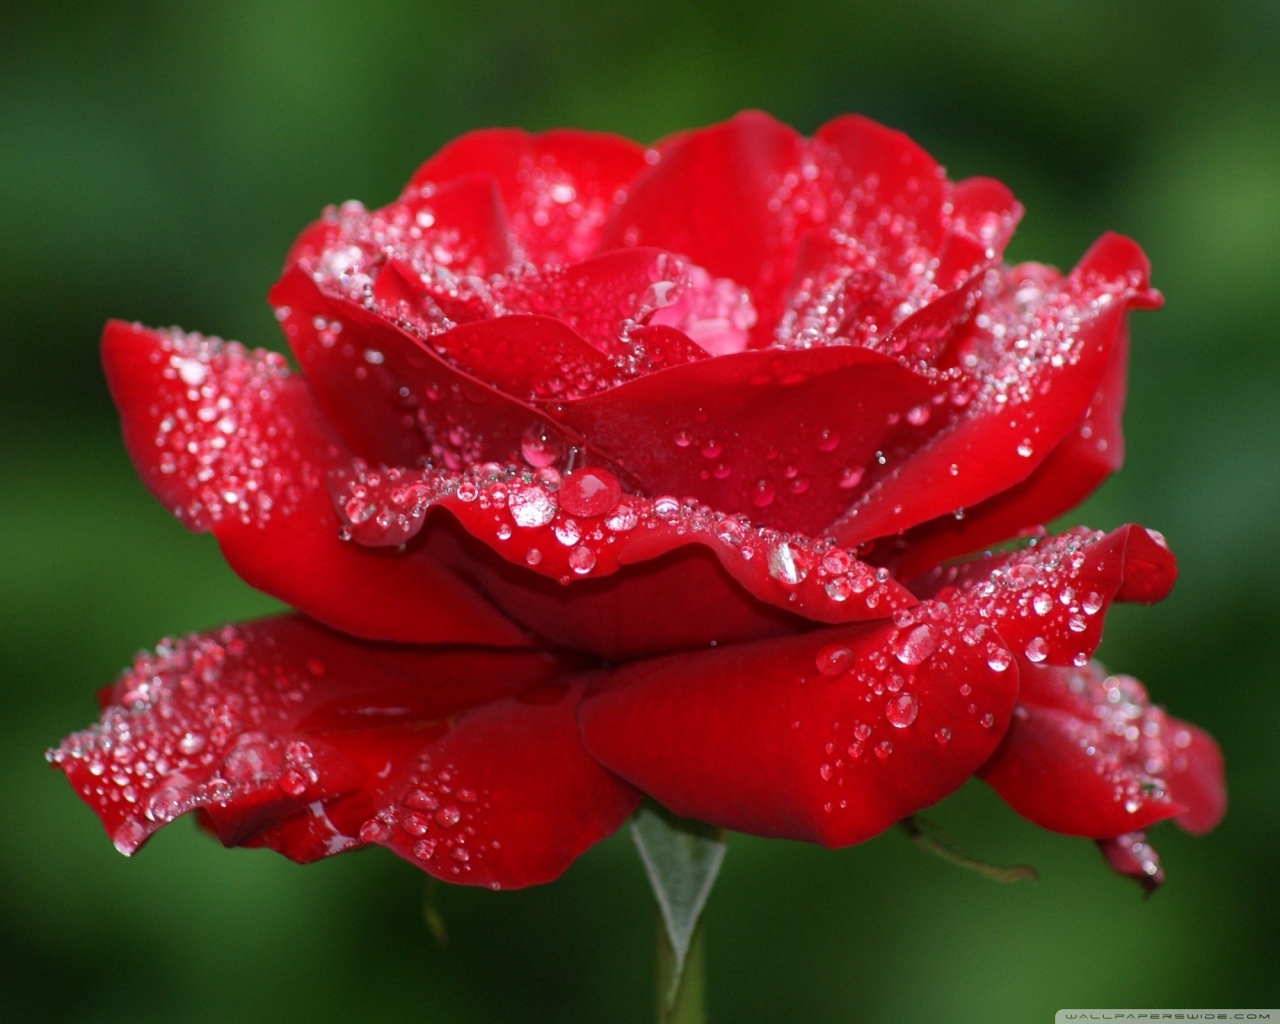 Red Roses Hd Wallpapers